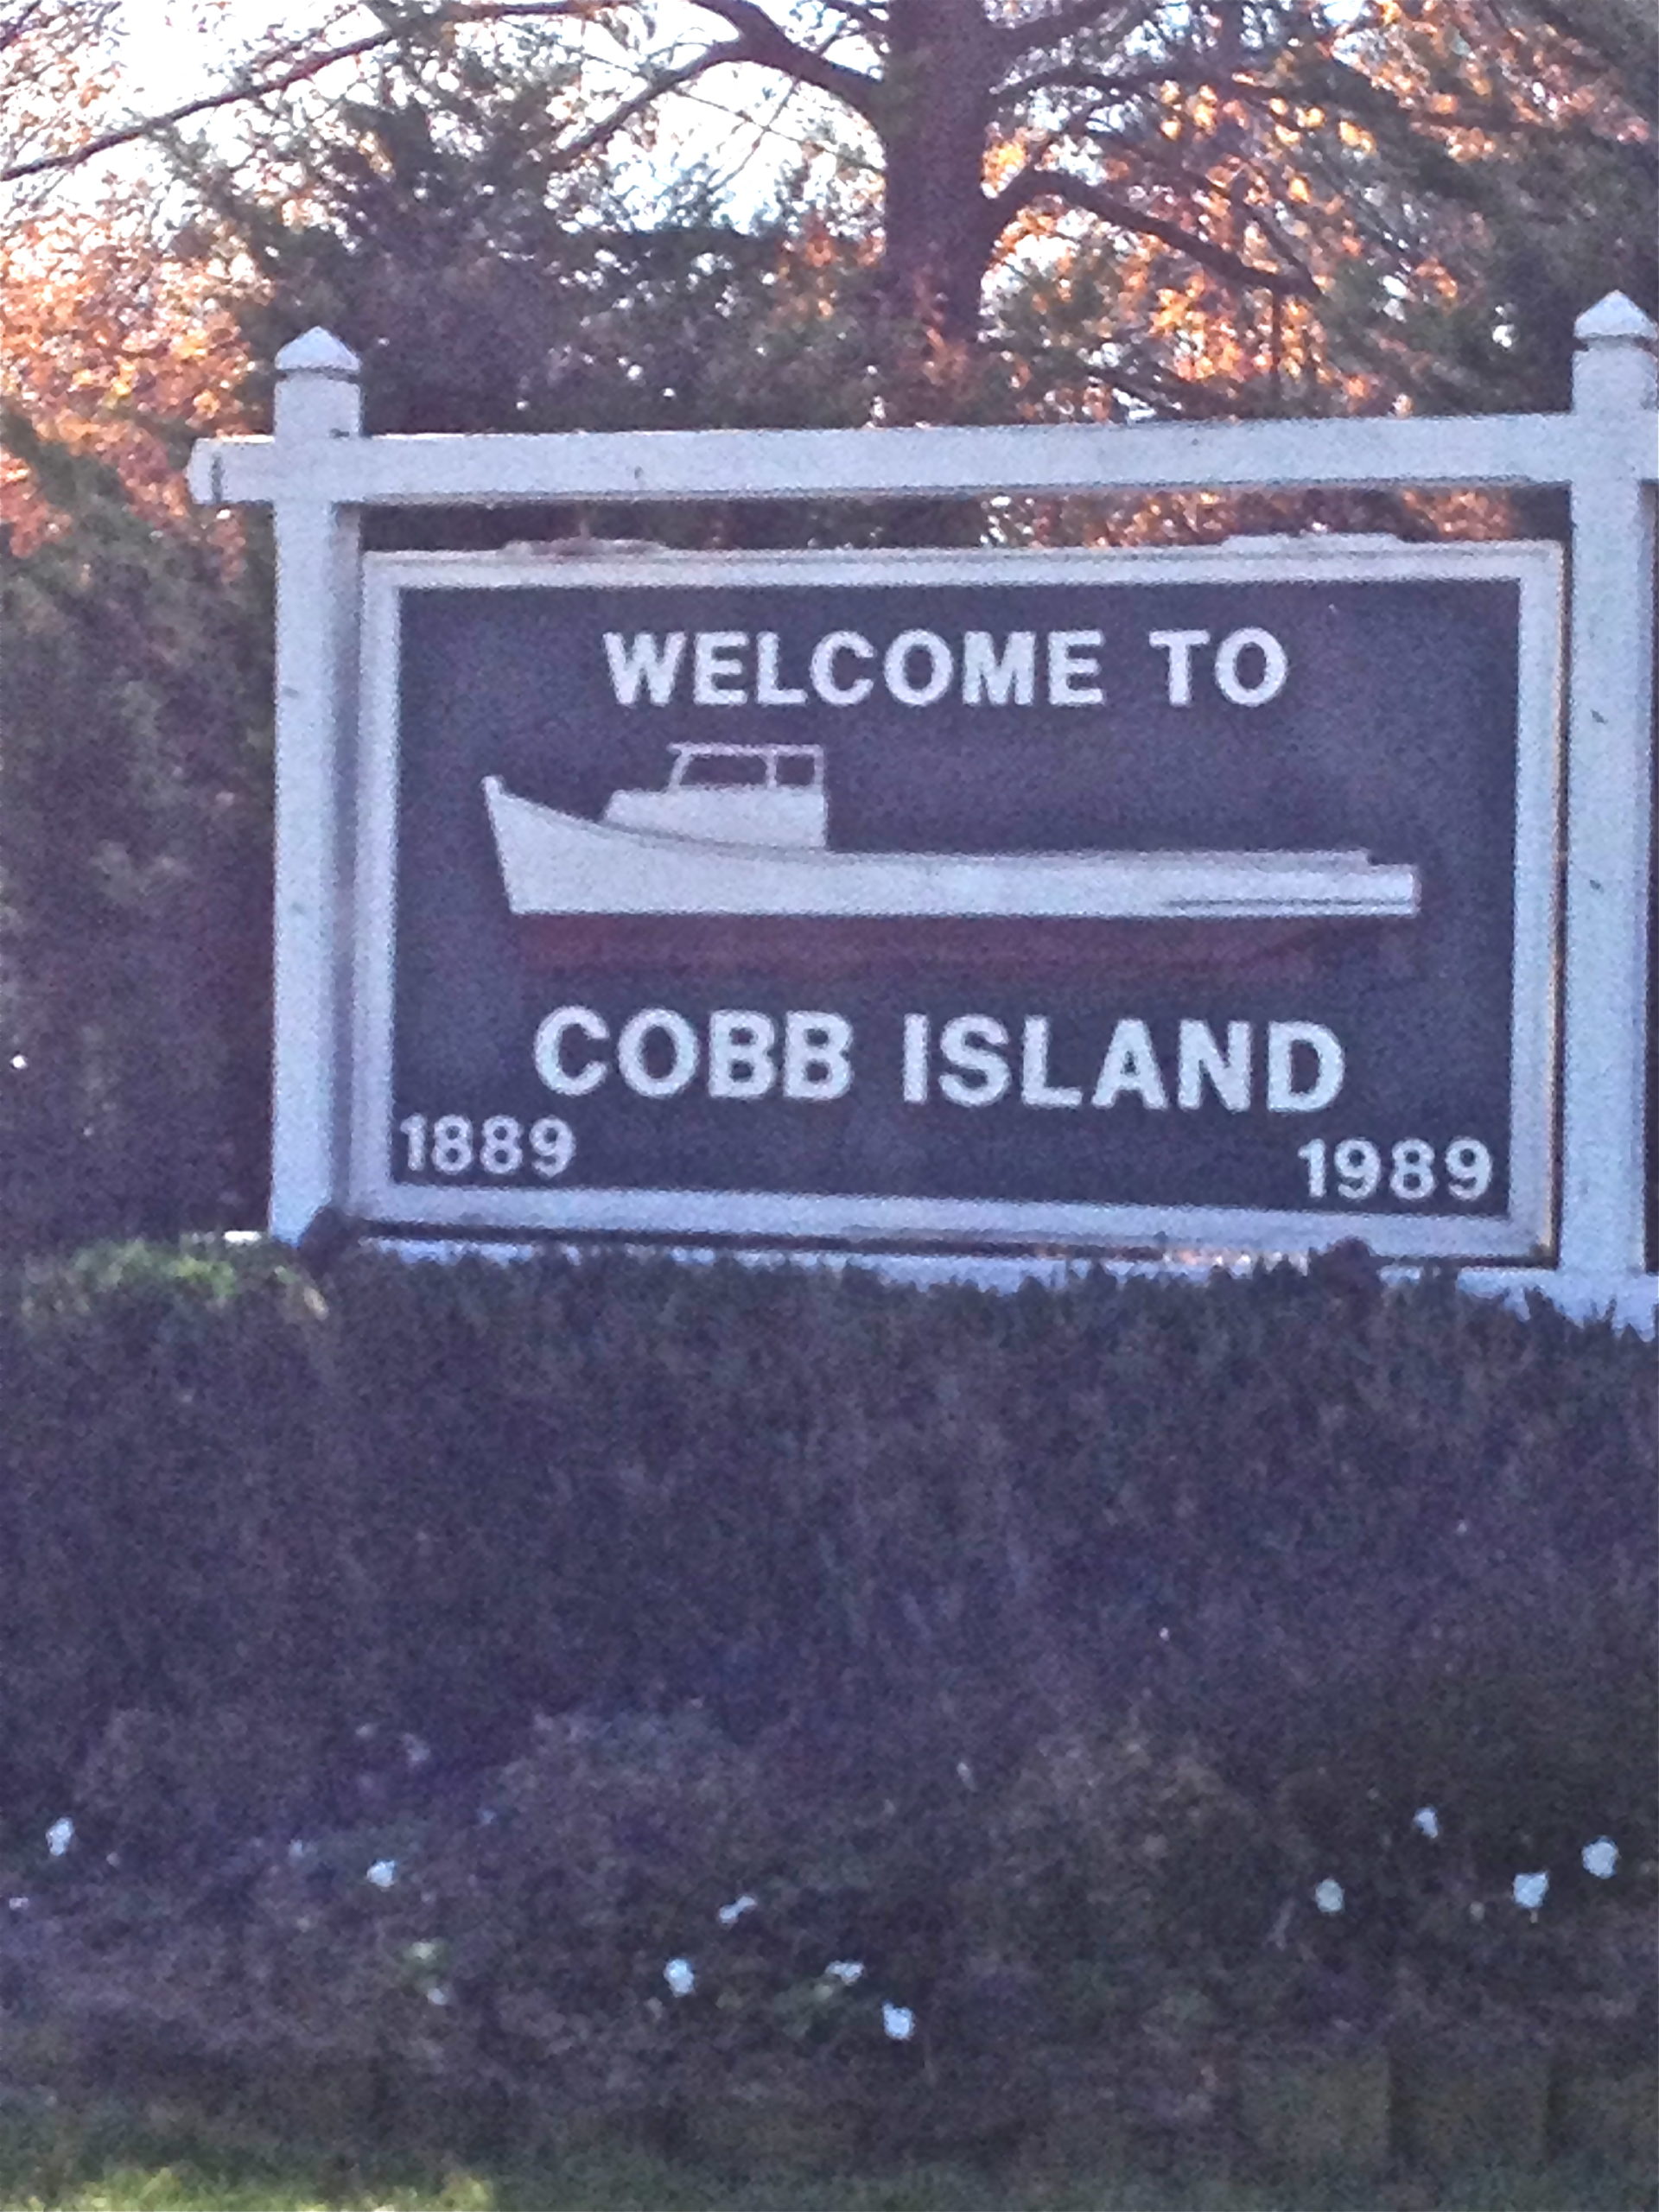 Cobb Island md waterfront homes, Cobb Island md real estate, cobb island md real estate agent, cobb island md homes for sale